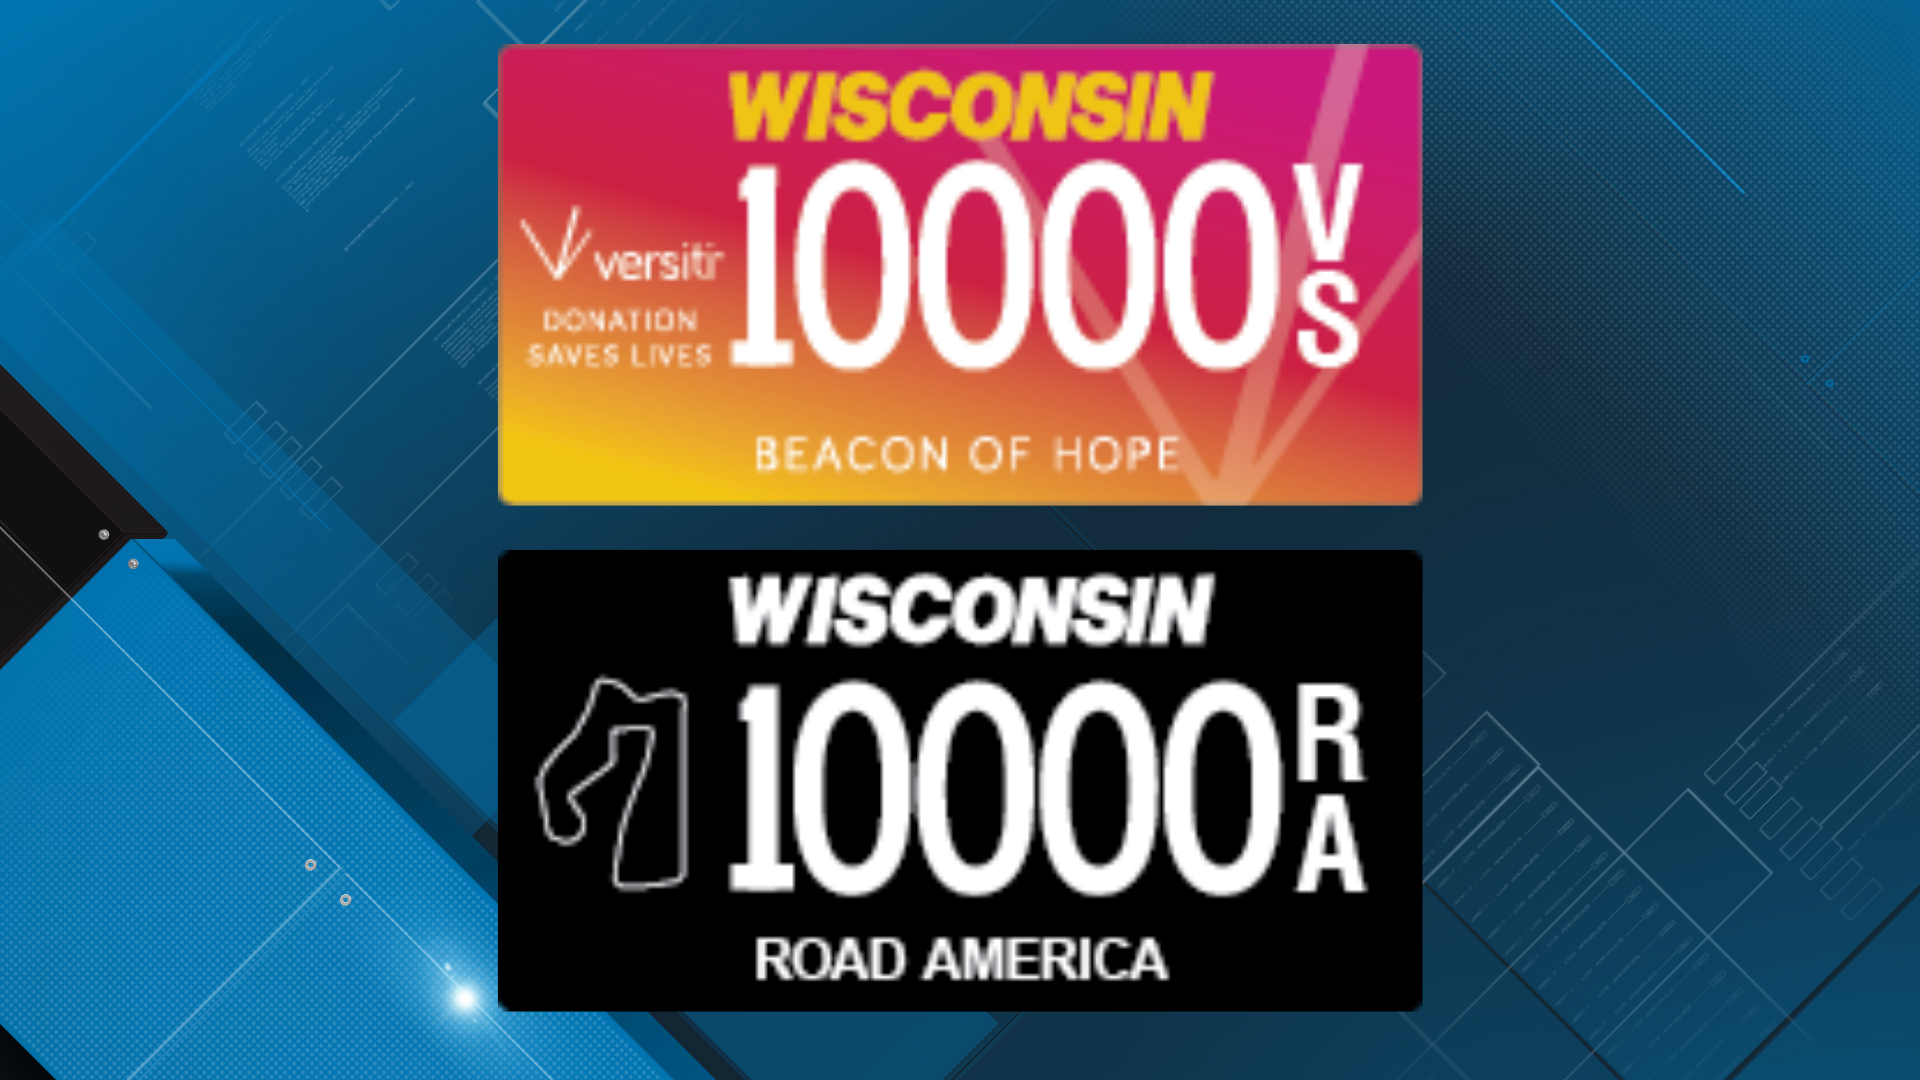 DMV releases two new license plates for Wisconsin motorists